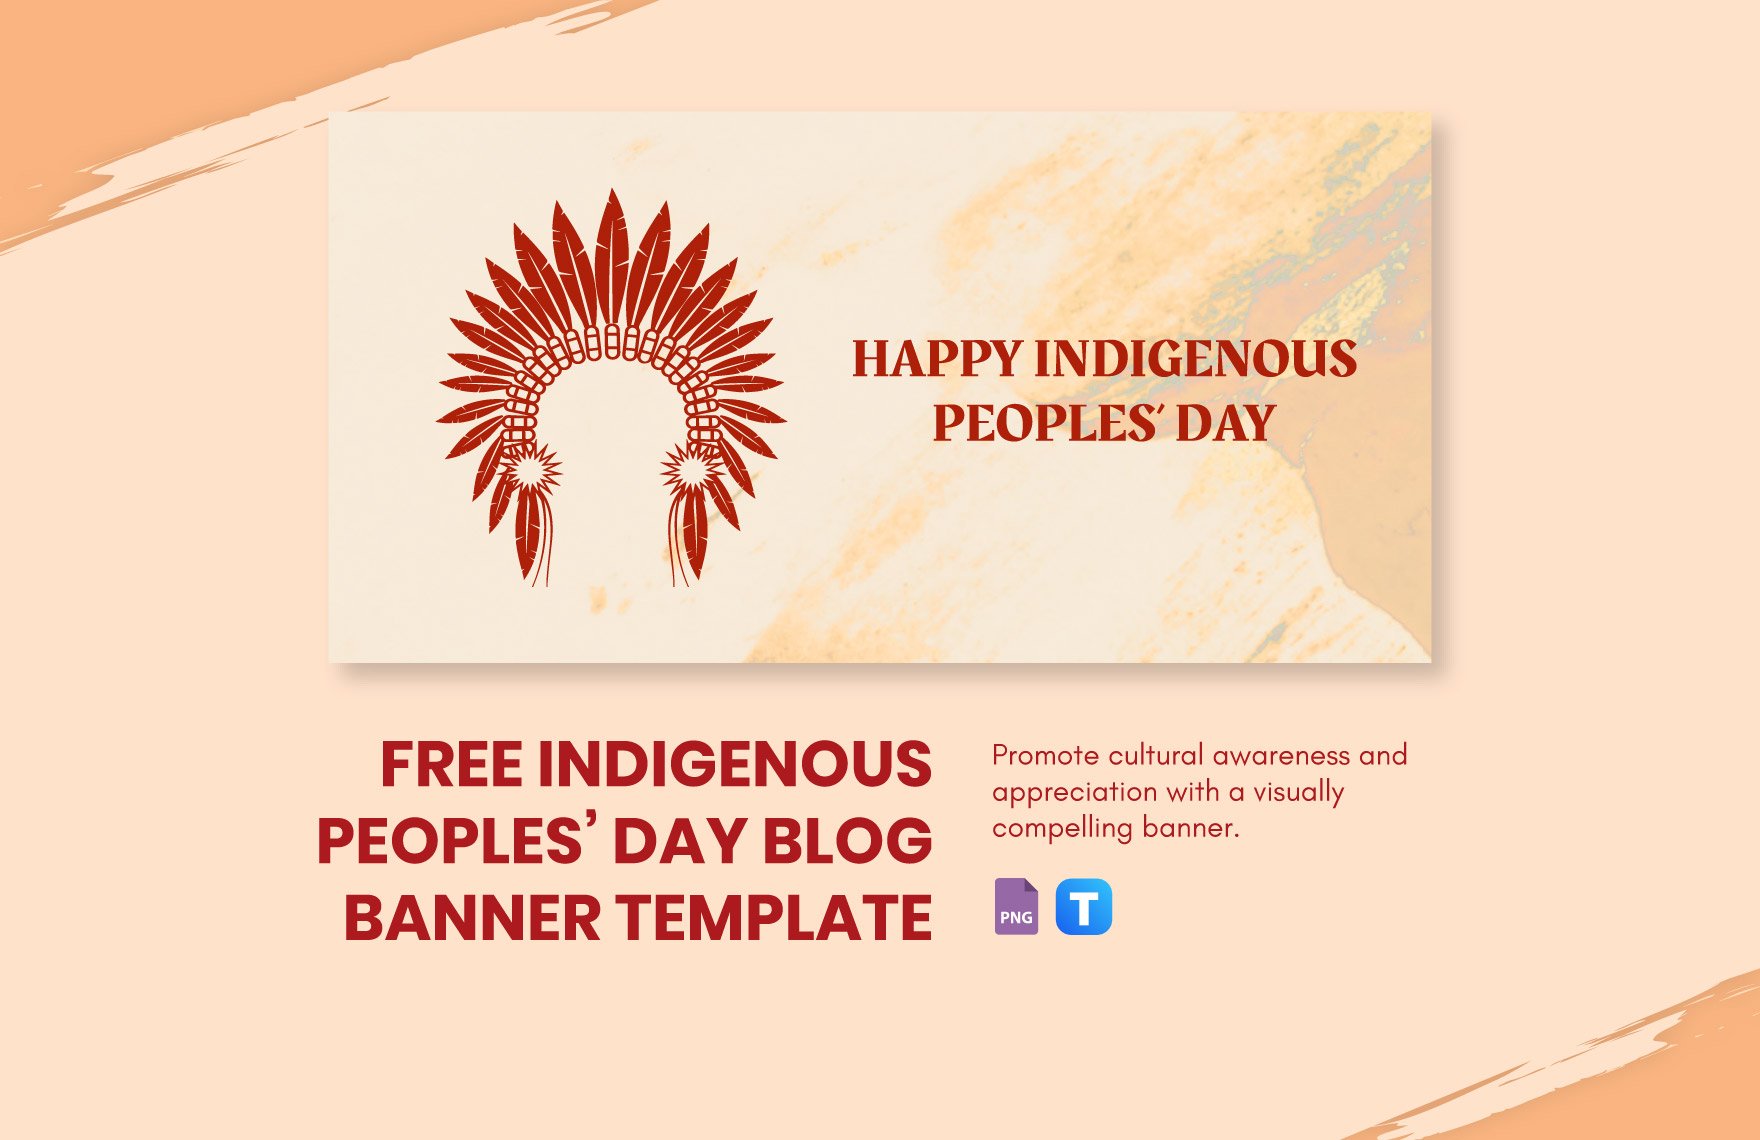 Indigenous Peoples' Day Blog Banner Template in PNG